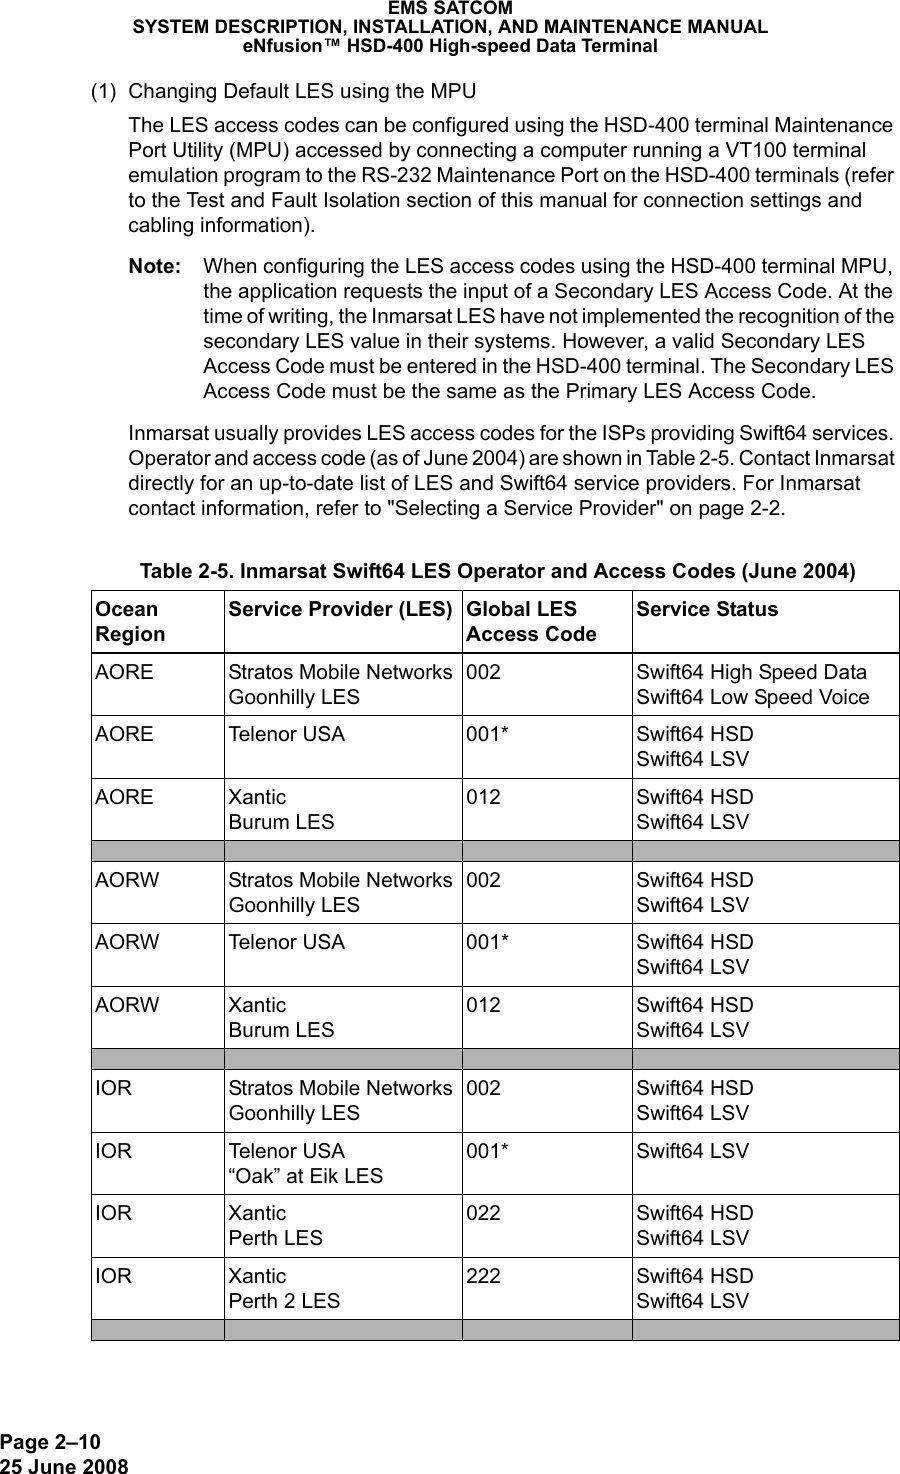 Page 2–1025 June 2008 EMS SATCOMSYSTEM DESCRIPTION, INSTALLATION, AND MAINTENANCE MANUALeNfusion™ HSD-400 High-speed Data Terminal(1) Changing Default LES using the MPUThe LES access codes can be configured using the HSD-400 terminal Maintenance Port Utility (MPU) accessed by connecting a computer running a VT100 terminal emulation program to the RS-232 Maintenance Port on the HSD-400 terminals (refer to the Test and Fault Isolation section of this manual for connection settings and cabling information). Note: When configuring the LES access codes using the HSD-400 terminal MPU, the application requests the input of a Secondary LES Access Code. At the time of writing, the Inmarsat LES have not implemented the recognition of the secondary LES value in their systems. However, a valid Secondary LES Access Code must be entered in the HSD-400 terminal. The Secondary LES Access Code must be the same as the Primary LES Access Code. Inmarsat usually provides LES access codes for the ISPs providing Swift64 services. Operator and access code (as of June 2004) are shown in Table 2-5. Contact Inmarsat directly for an up-to-date list of LES and Swift64 service providers. For Inmarsat contact information, refer to &quot;Selecting a Service Provider&quot; on page 2-2. Table 2-5. Inmarsat Swift64 LES Operator and Access Codes (June 2004) Ocean RegionService Provider (LES) Global LES Access CodeService StatusAORE Stratos Mobile Networks Goonhilly LES002 Swift64 High Speed Data Swift64 Low Speed VoiceAORE Telenor USA 001* Swift64 HSD Swift64 LSVAORE Xantic Burum LES012 Swift64 HSD Swift64 LSVAORW Stratos Mobile Networks Goonhilly LES002 Swift64 HSD Swift64 LSVAORW Telenor USA 001* Swift64 HSD Swift64 LSVAORW Xantic Burum LES012 Swift64 HSD Swift64 LSVIOR Stratos Mobile Networks Goonhilly LES002 Swift64 HSD Swift64 LSVIOR Telenor USA “Oak” at Eik LES001* Swift64 LSVIOR Xantic Perth LES022 Swift64 HSD Swift64 LSVIOR Xantic Perth 2 LES222 Swift64 HSD Swift64 LSV